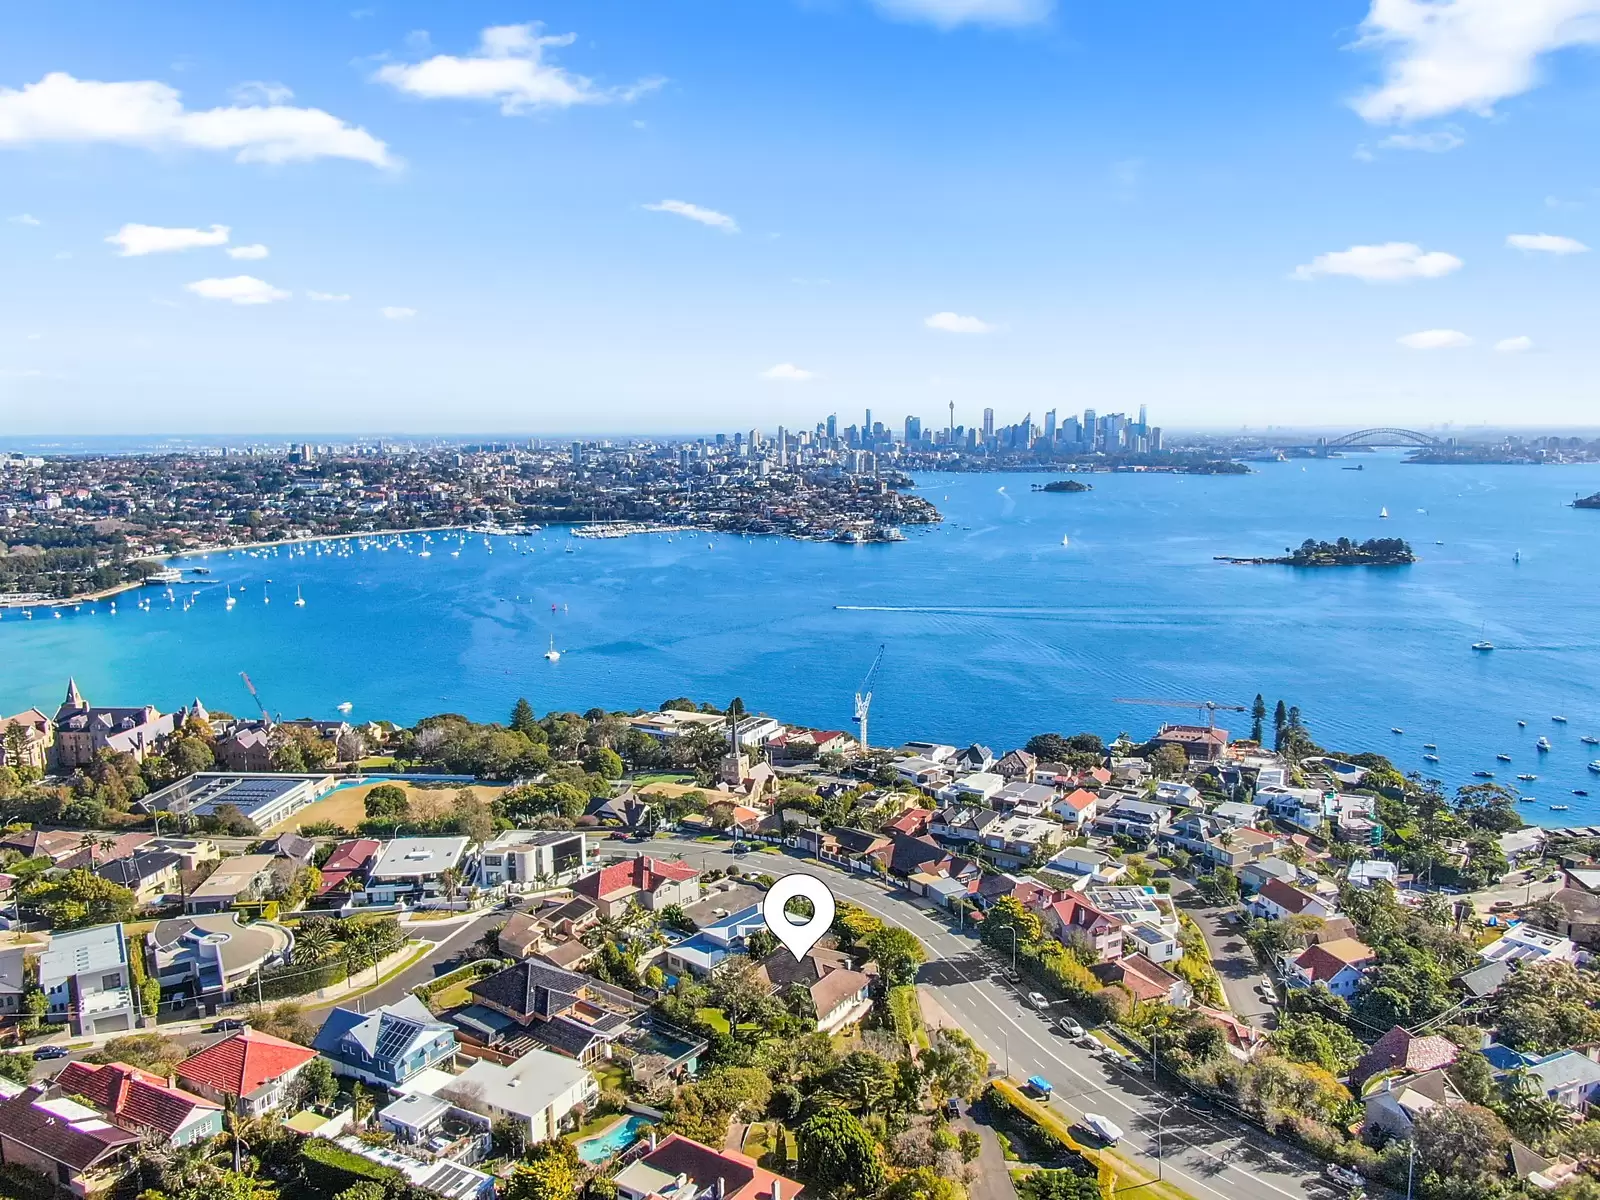 Photo #7: 35 New South Head Road, Vaucluse - Sold by Sydney Sotheby's International Realty